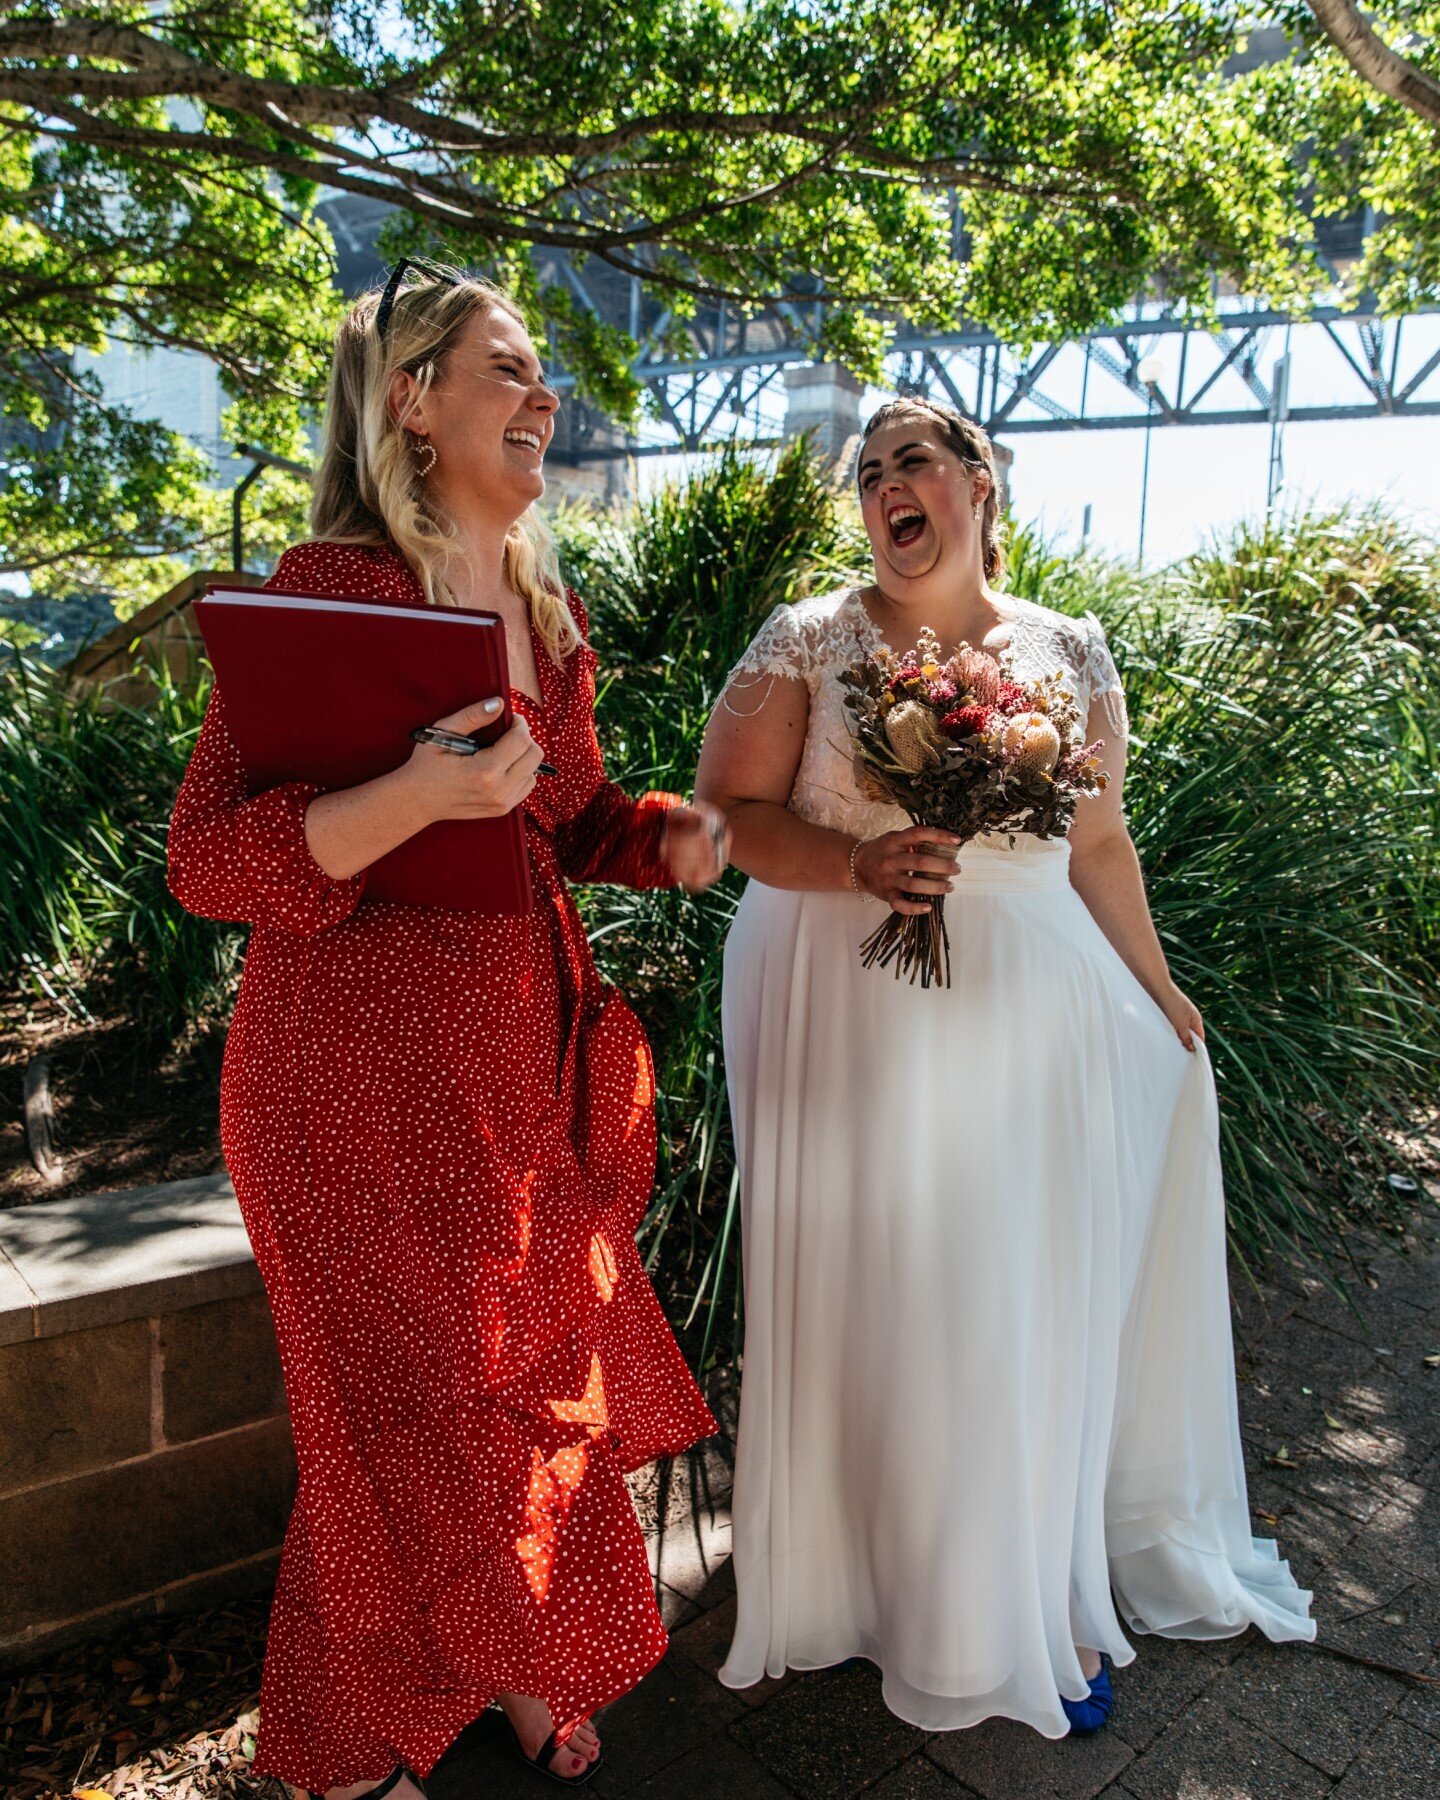 🤍CACKLE CREW🤍

Pre-ceremony visits to Shae in 30+ degrees meant one thing - hilarity at every turn.

I have many powers. One of them is making sure you laugh and cry at the same time. It's a thing.

#sorrynotsorry

Bride + Groom: Shae + Keith
Locat